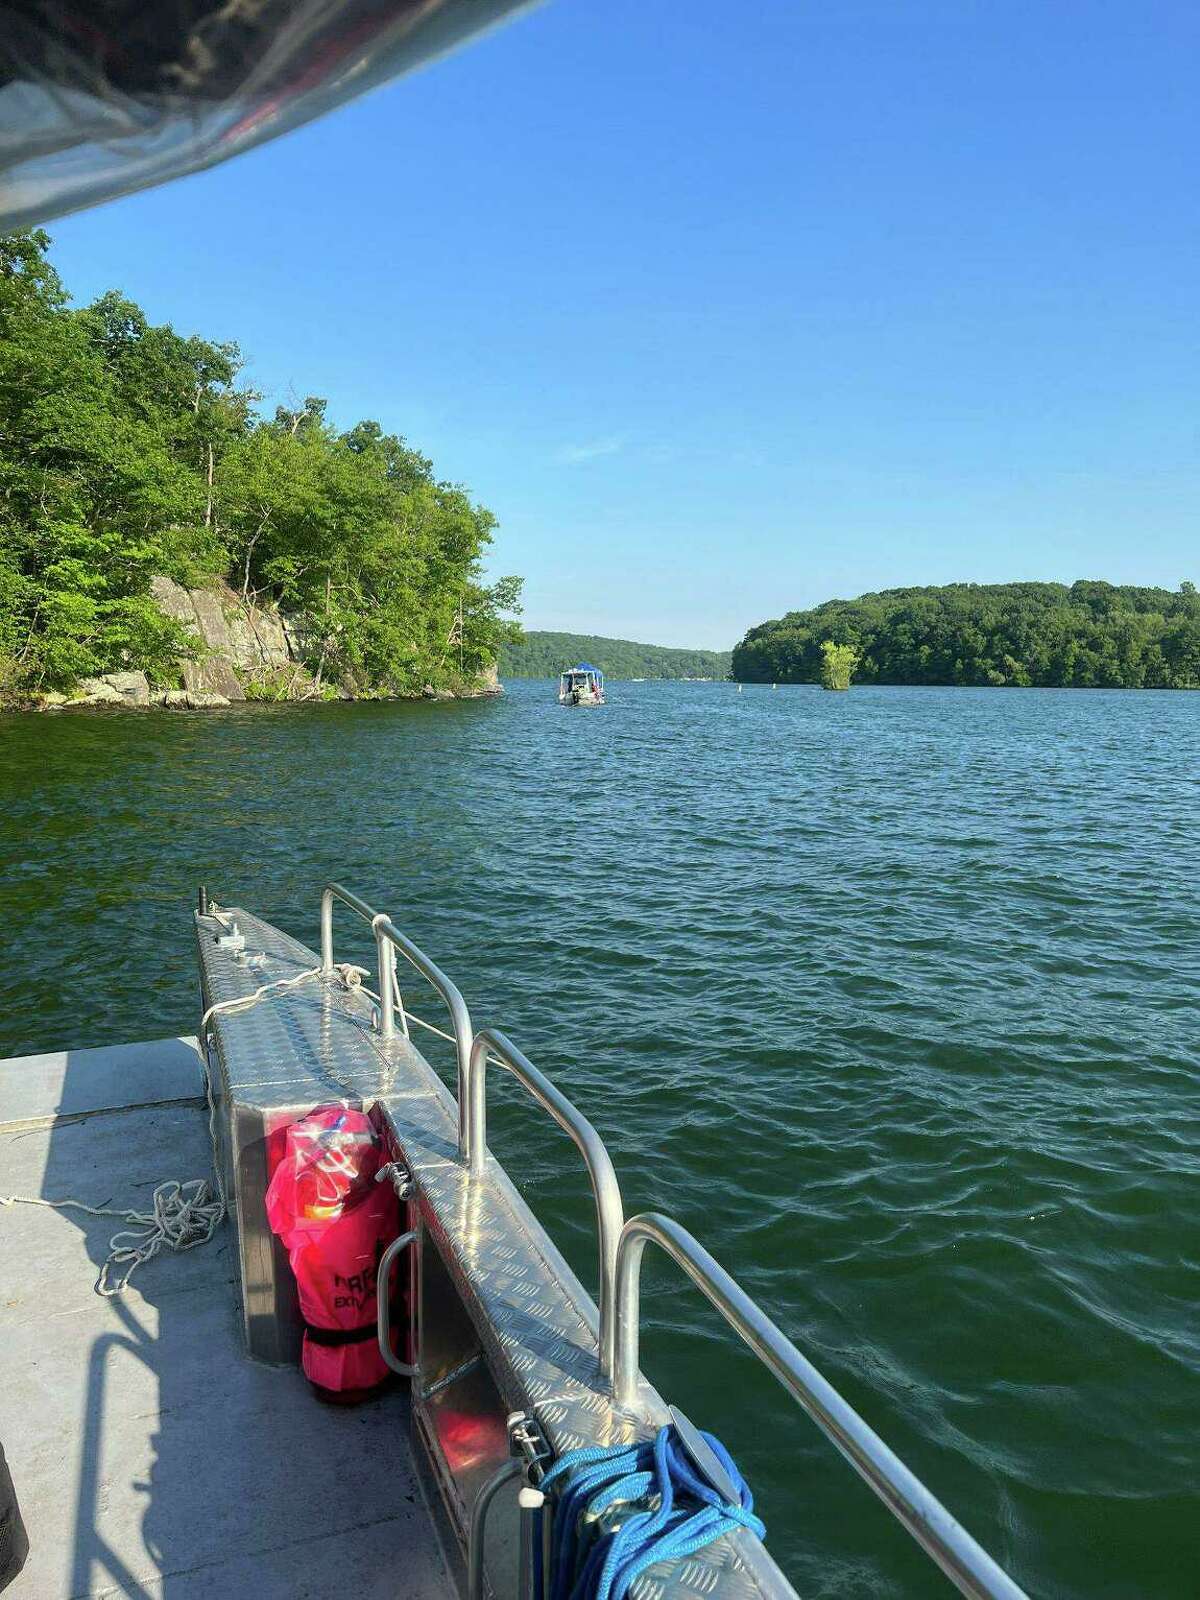 Authorities were searching for a 20-year-old swimmer who was reported missing in Candlewood Lake since Friday evening. The man was reported to have been swimming near Chicken Rock.